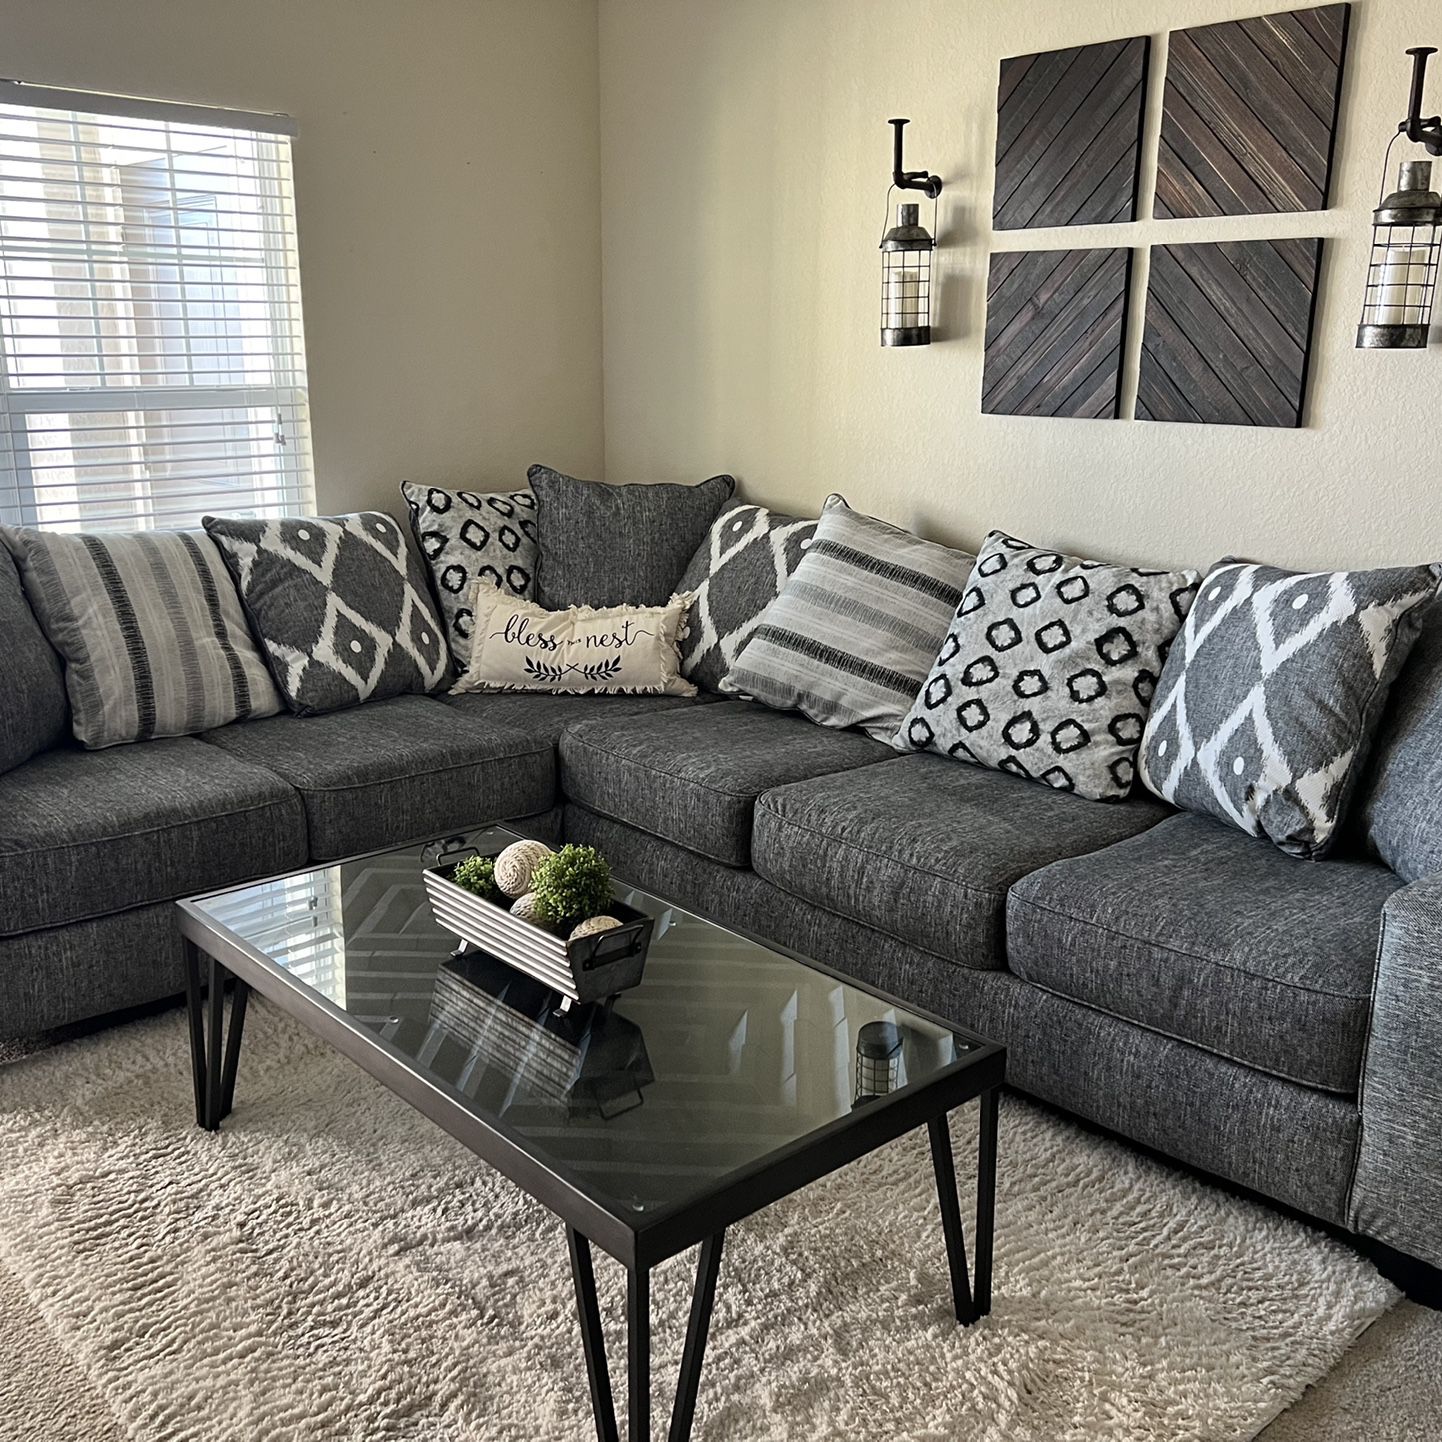 Full Living Room Set - Rooms To Go for Sale in Orlando, FL - OfferUp